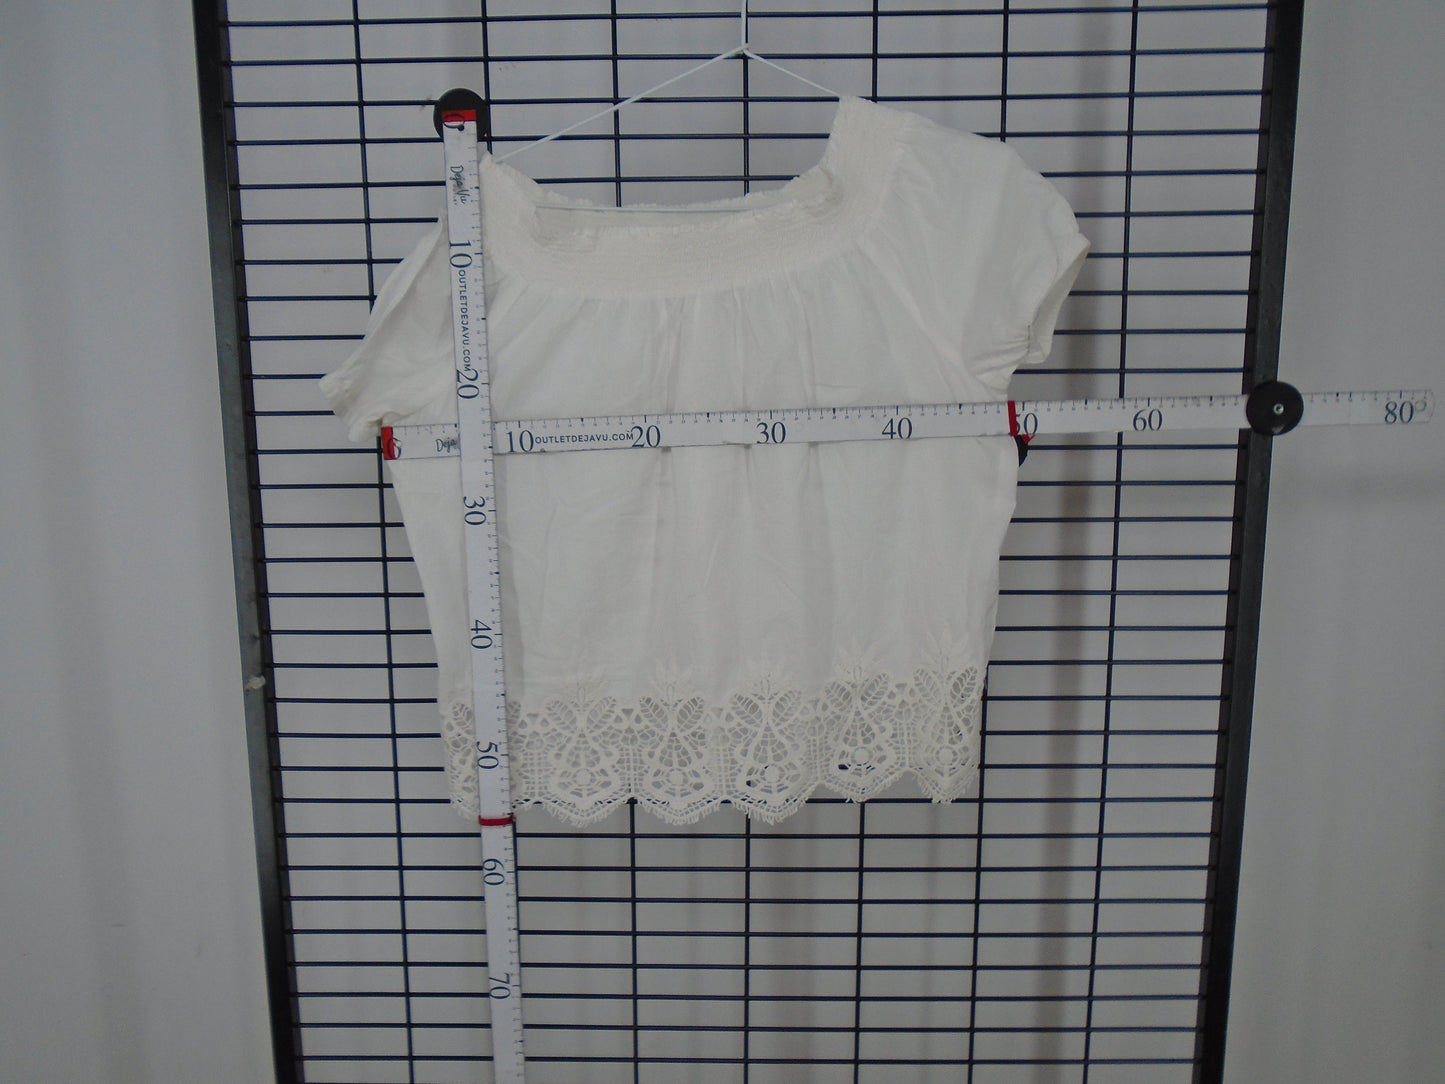 Women's T-Shirt H&M. White. XS. Used. Very good condition